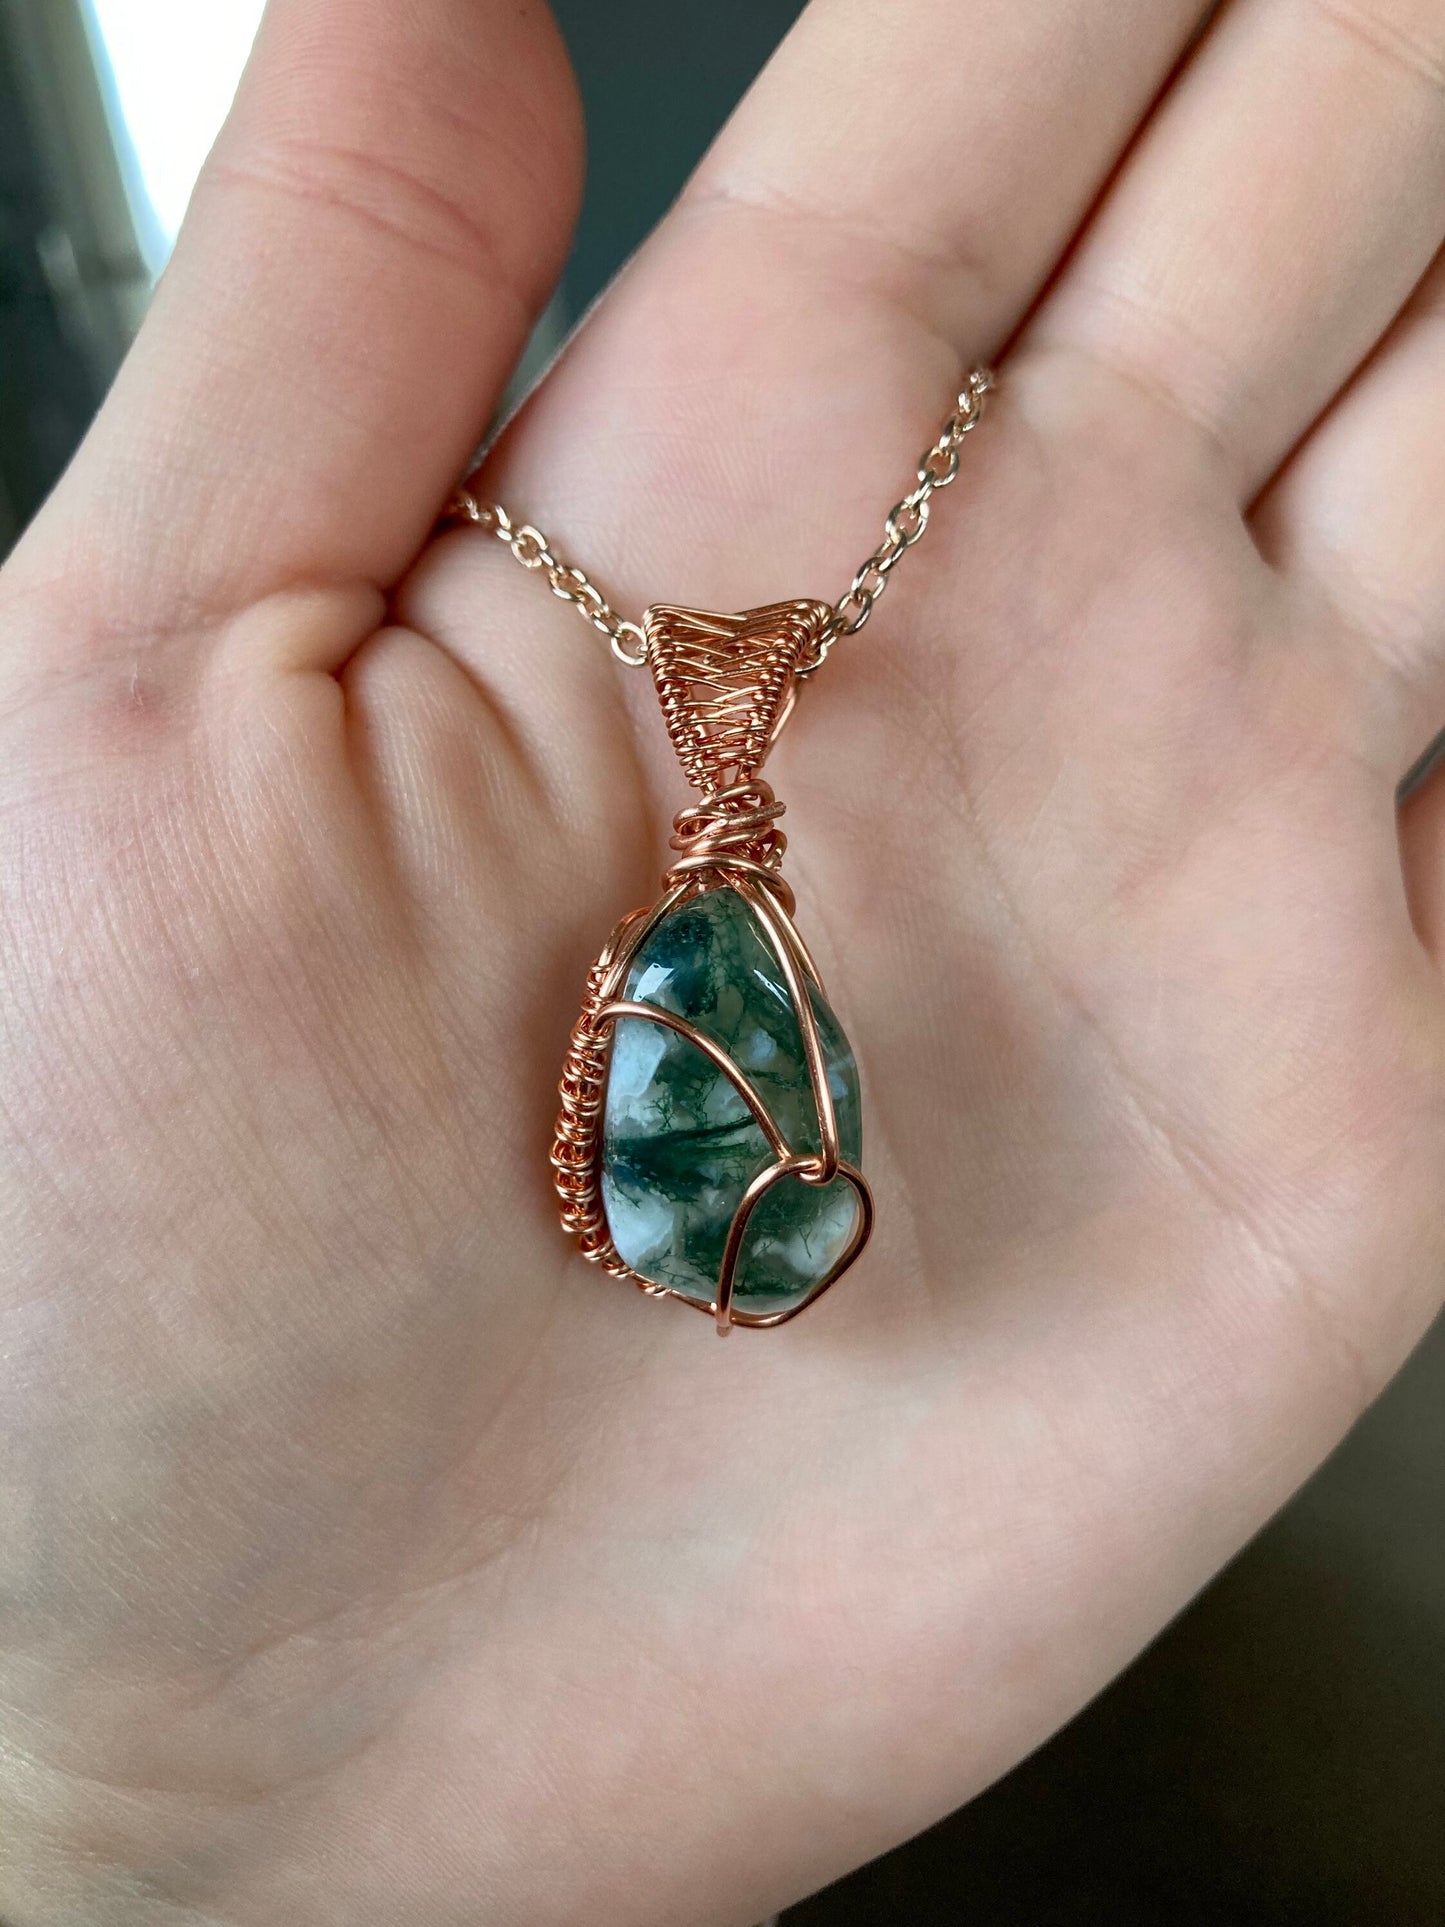 Tree agate pendant handmade necklace wire wrapped natural stone with 18 inch length chain